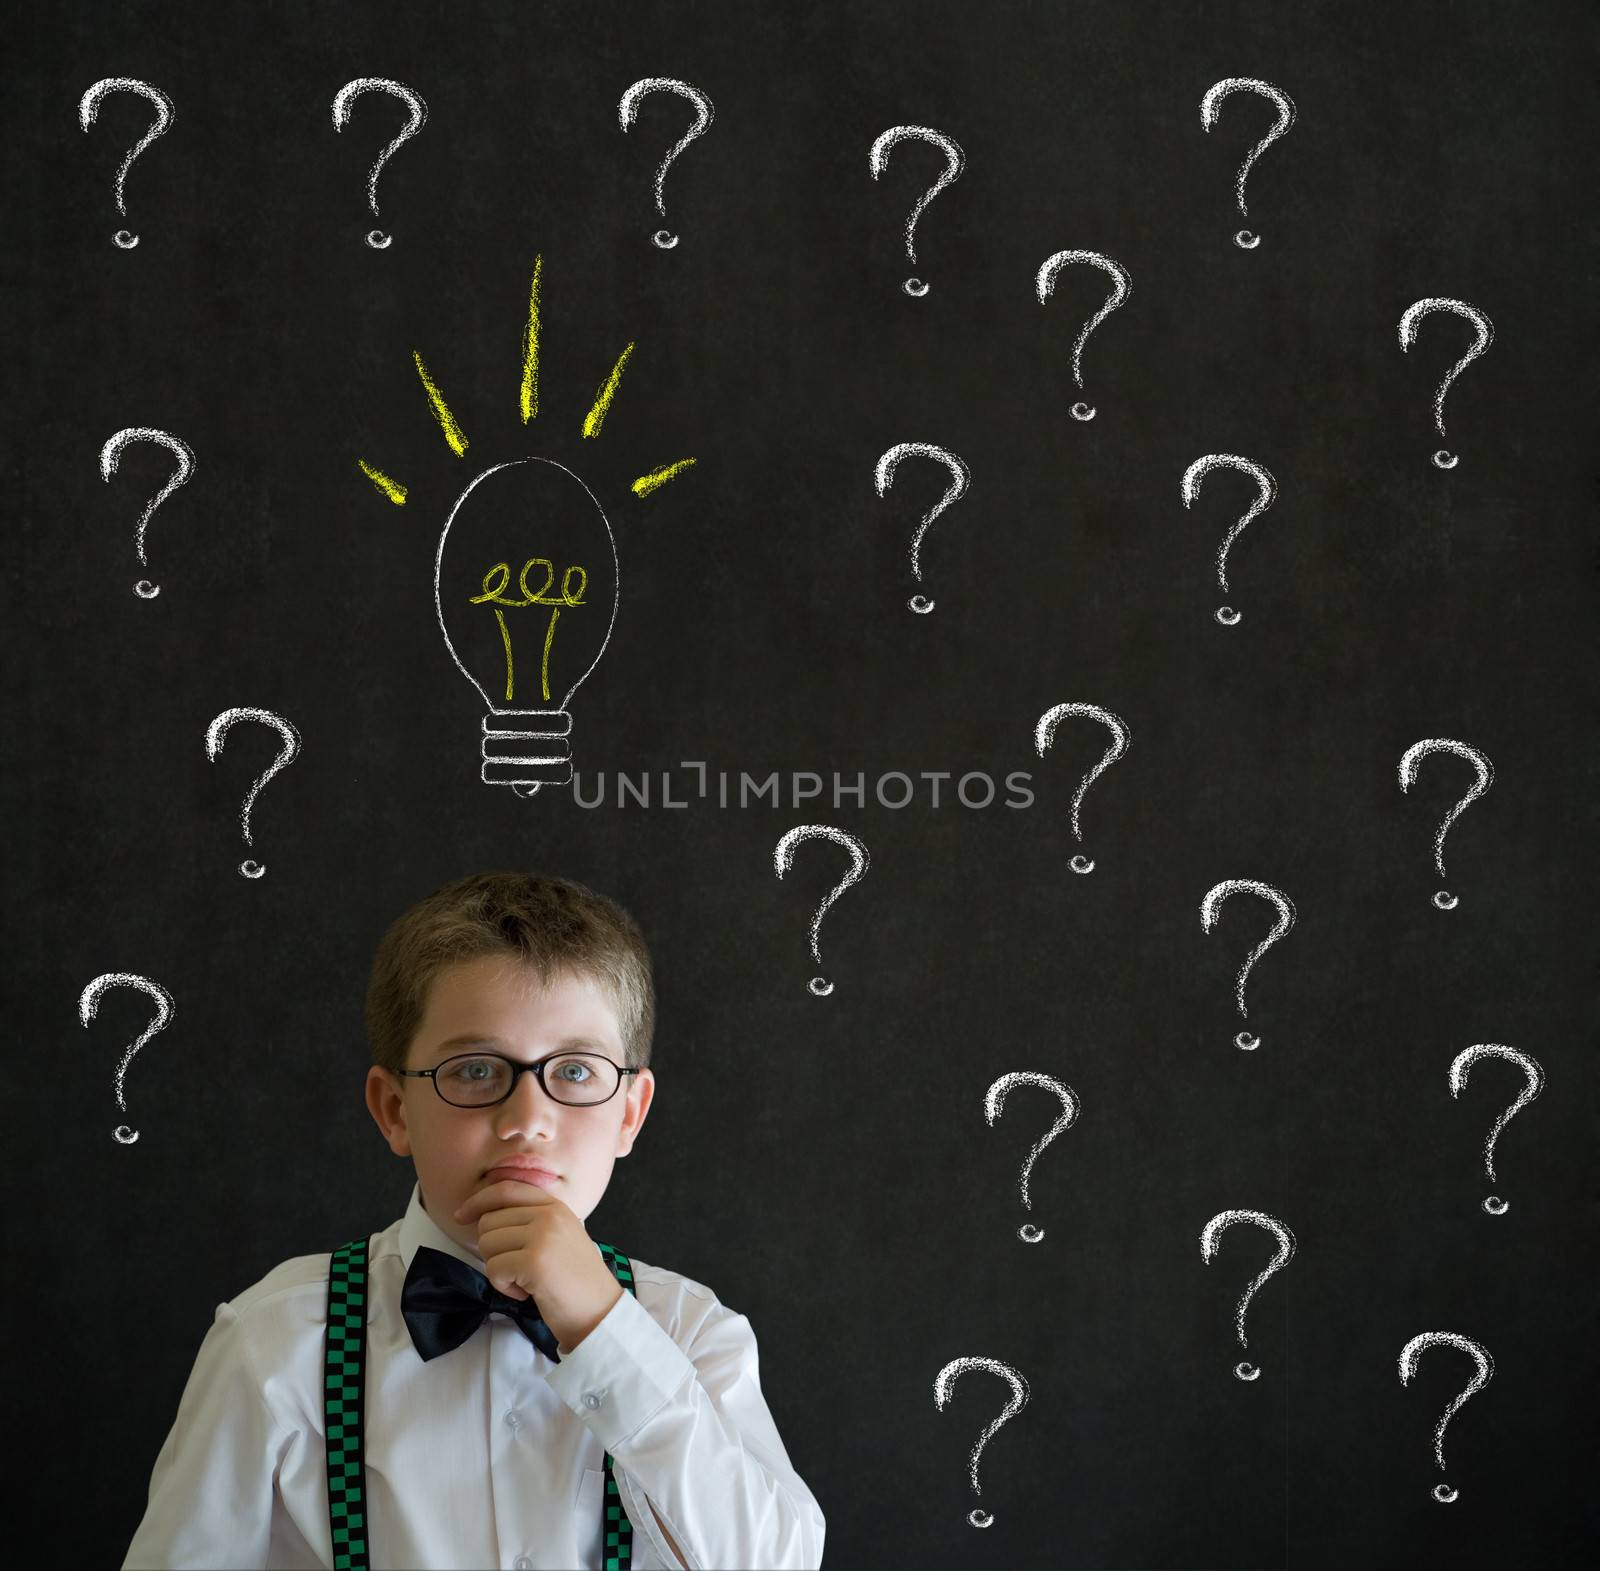 Thinking boy dressed up as business man questioning ideas on blackboard background